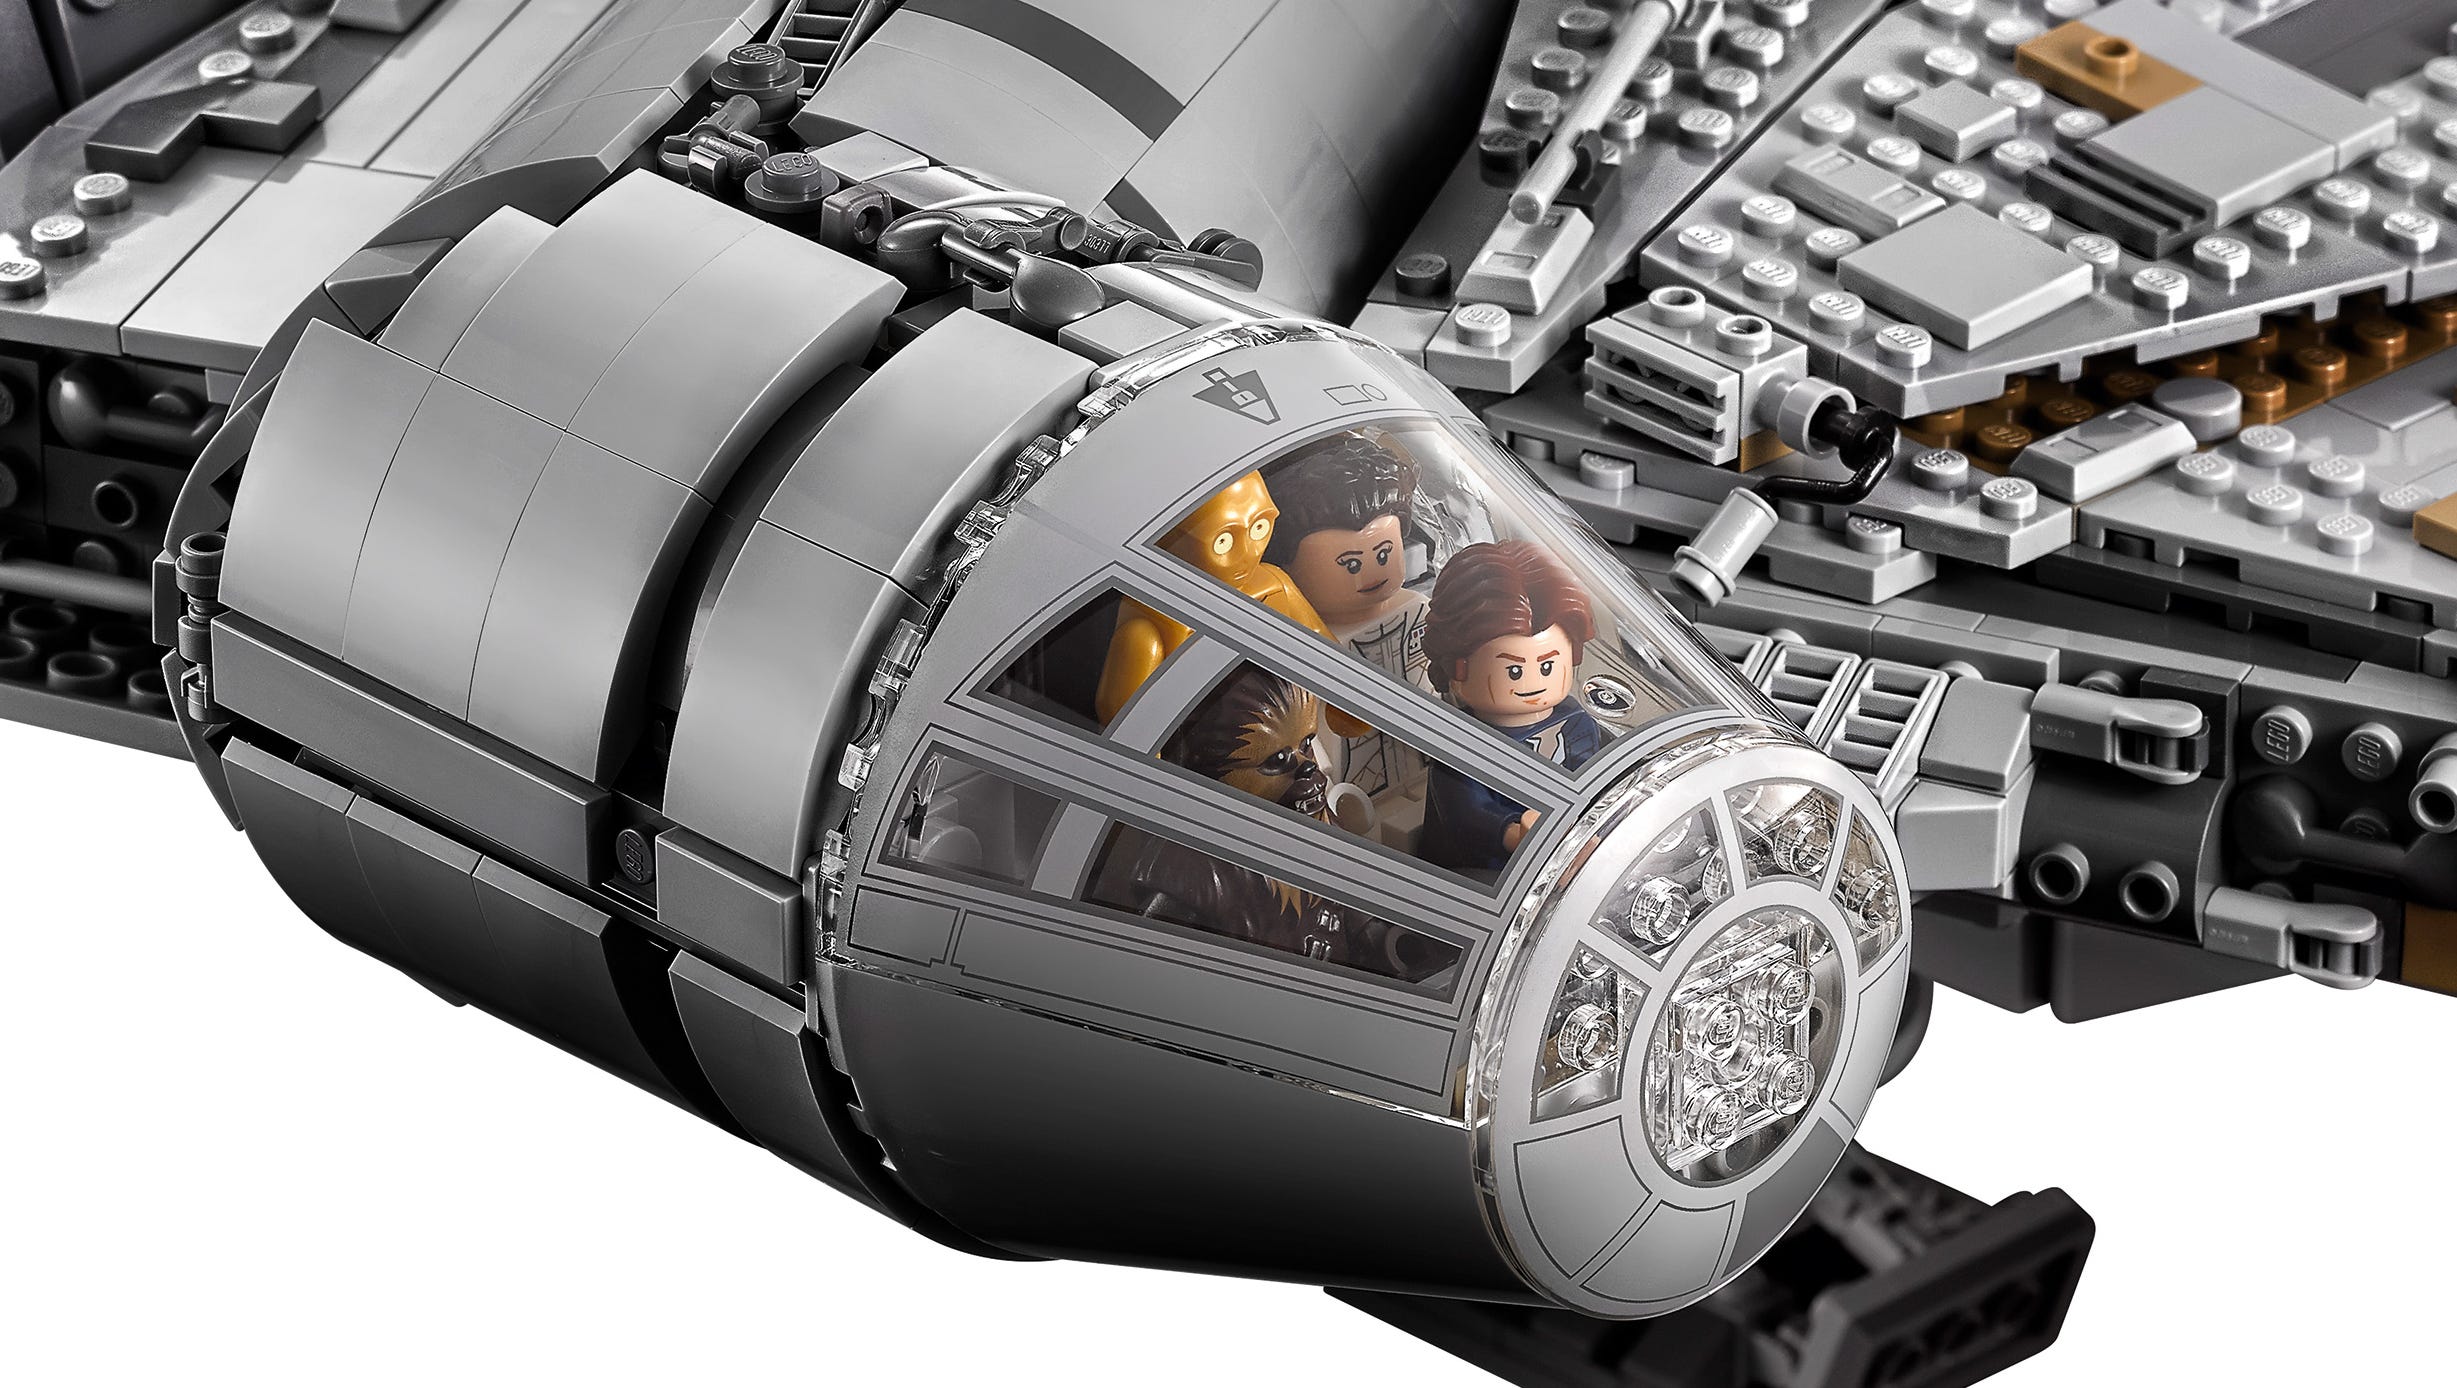 Lego's biggest set ever will be a 'Star starship (exclusive)